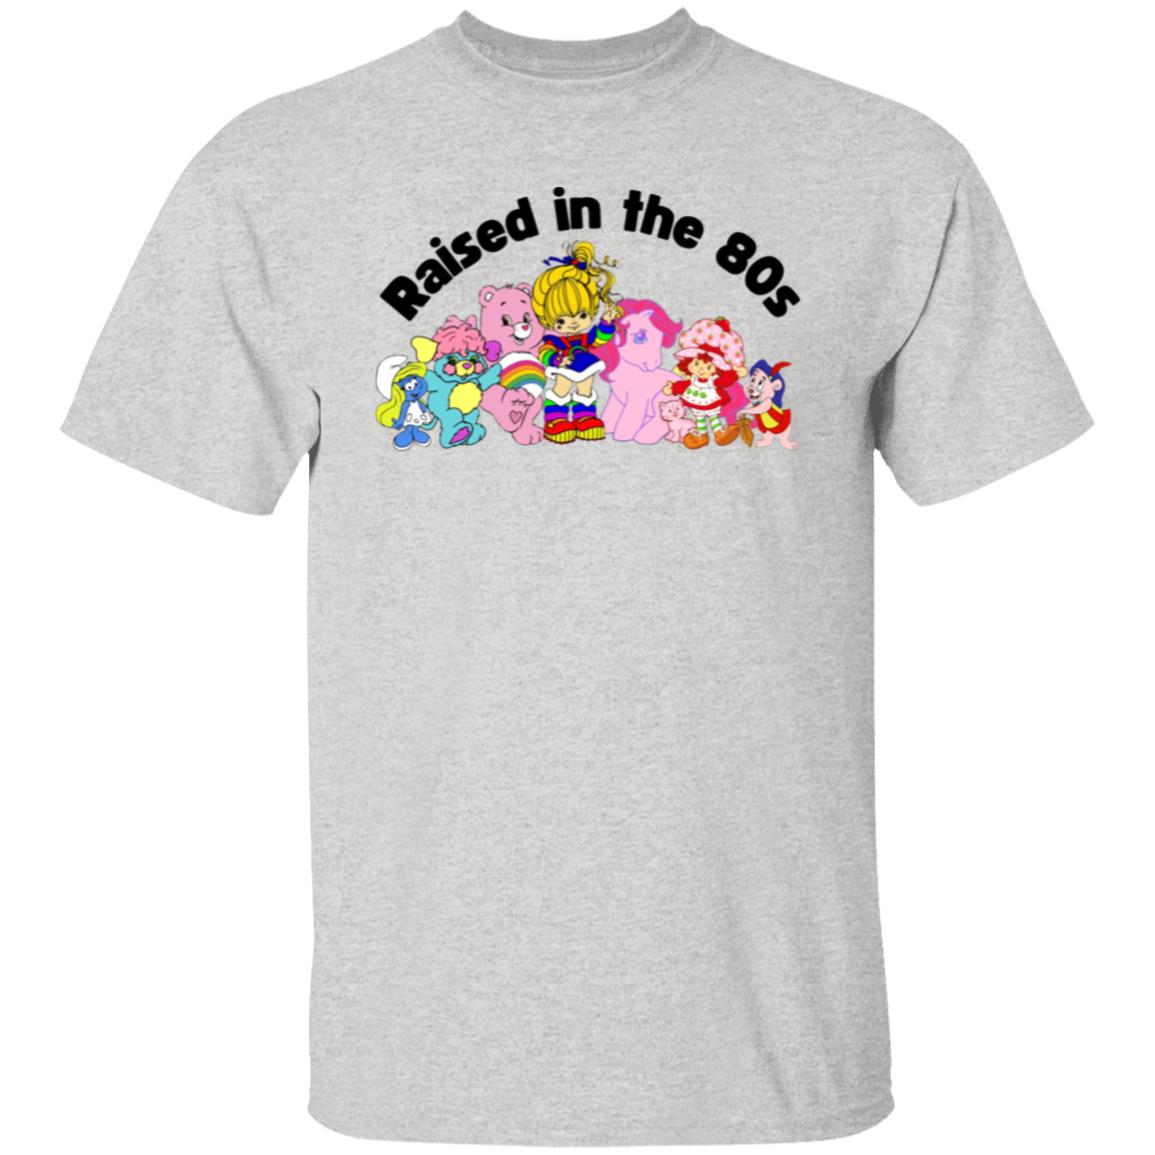 Raised in the 80s 5.3 oz. T-Shirt